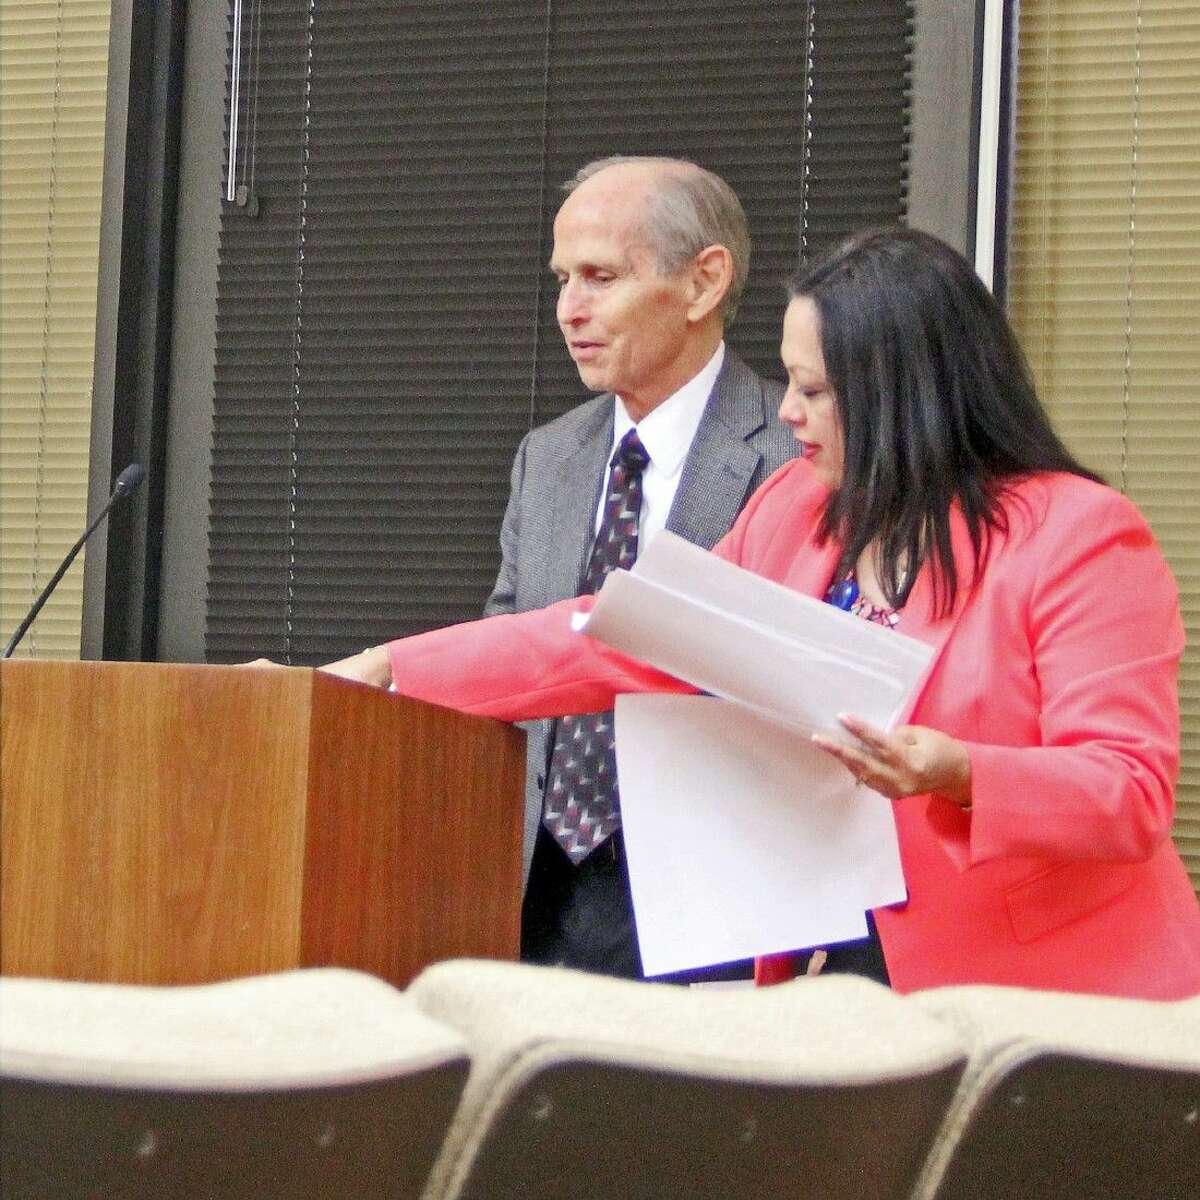 Public Works Director Robin Green (left) and Water Billing Manager Sylvia Mourtakos (right) unveiled a proposed water and sewer rate increase and projects to be funded with the increased revenues at a recent city council workshop.